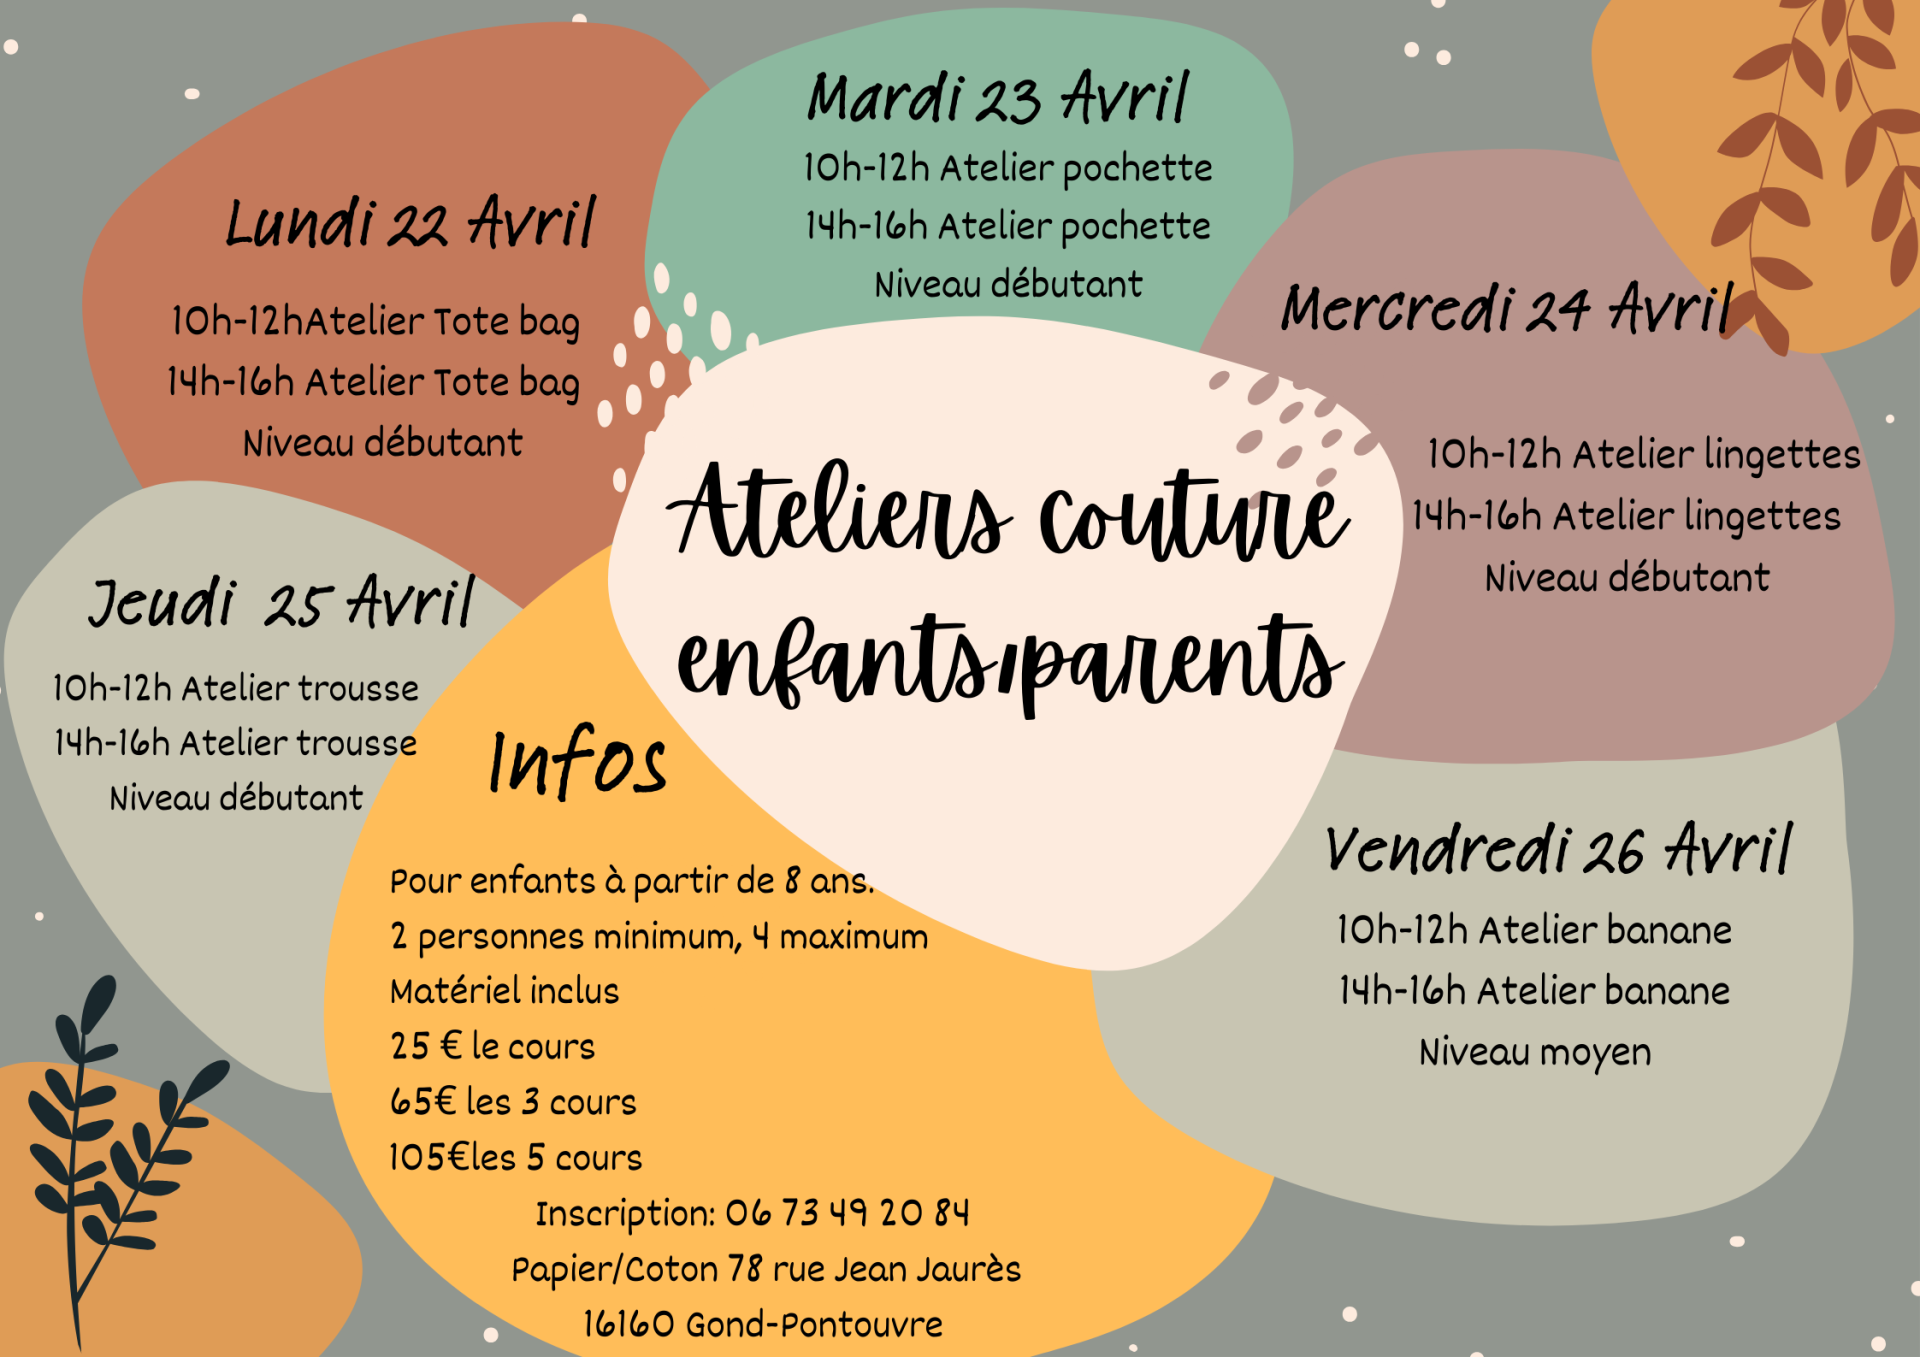 Ateliers couture image